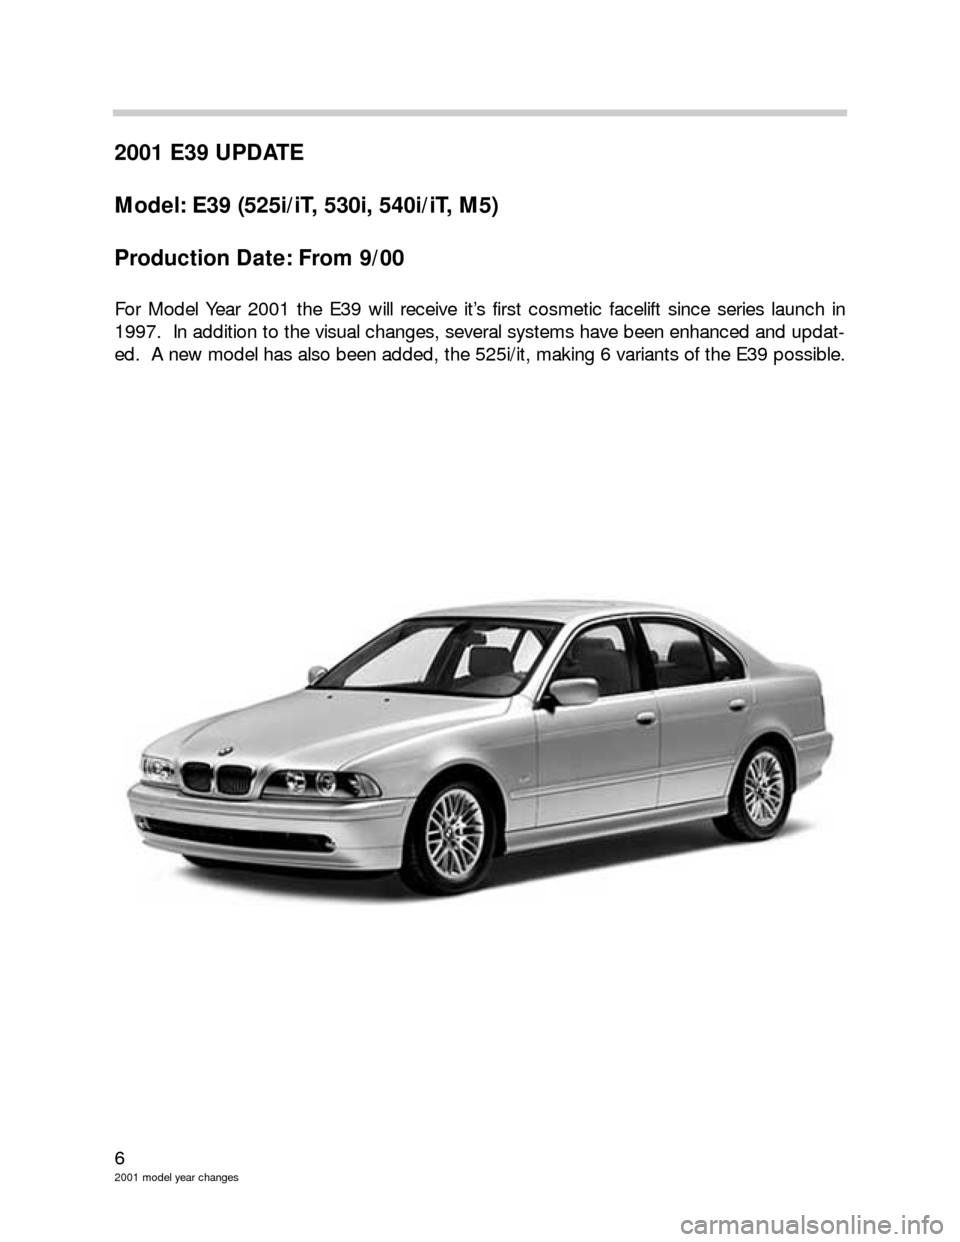 BMW 3 SERIES 2005 E46 Model Yar Changes 6
2001 model year changes
2001 E39 UPDATE
Model: E39 (525i/iT, 530i, 540i/iT, M5)
Production Date: From 9/00
For Model Year 2001 the E39 will receive it’s first cosmetic facelift since series launch